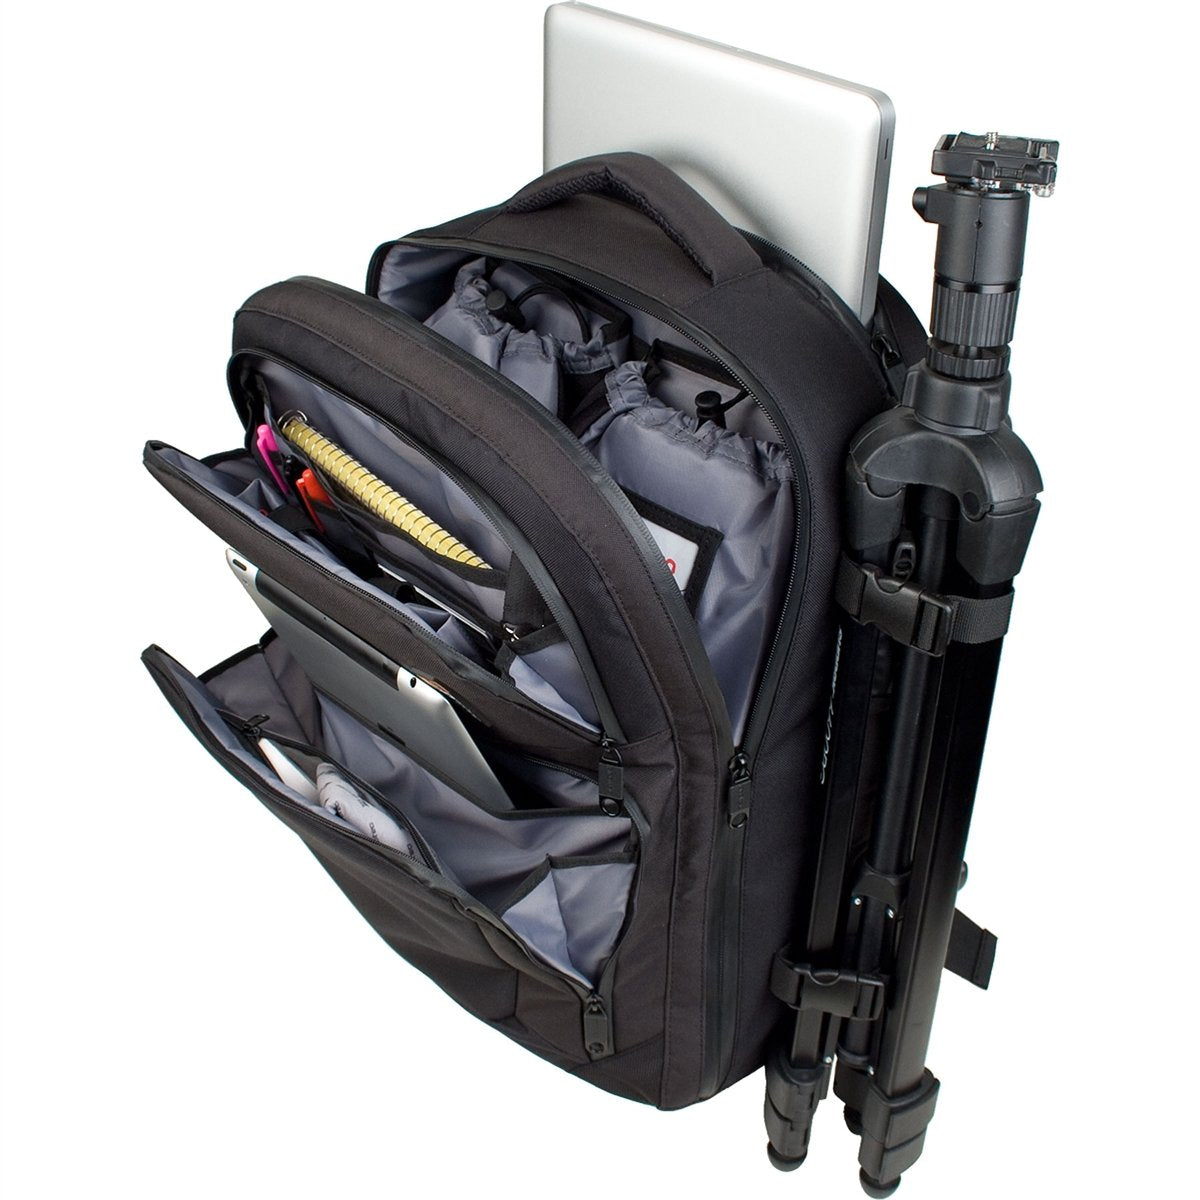 Protec - Camera Backpack with Modular Pockets-Accessories-Protec-Music Elements